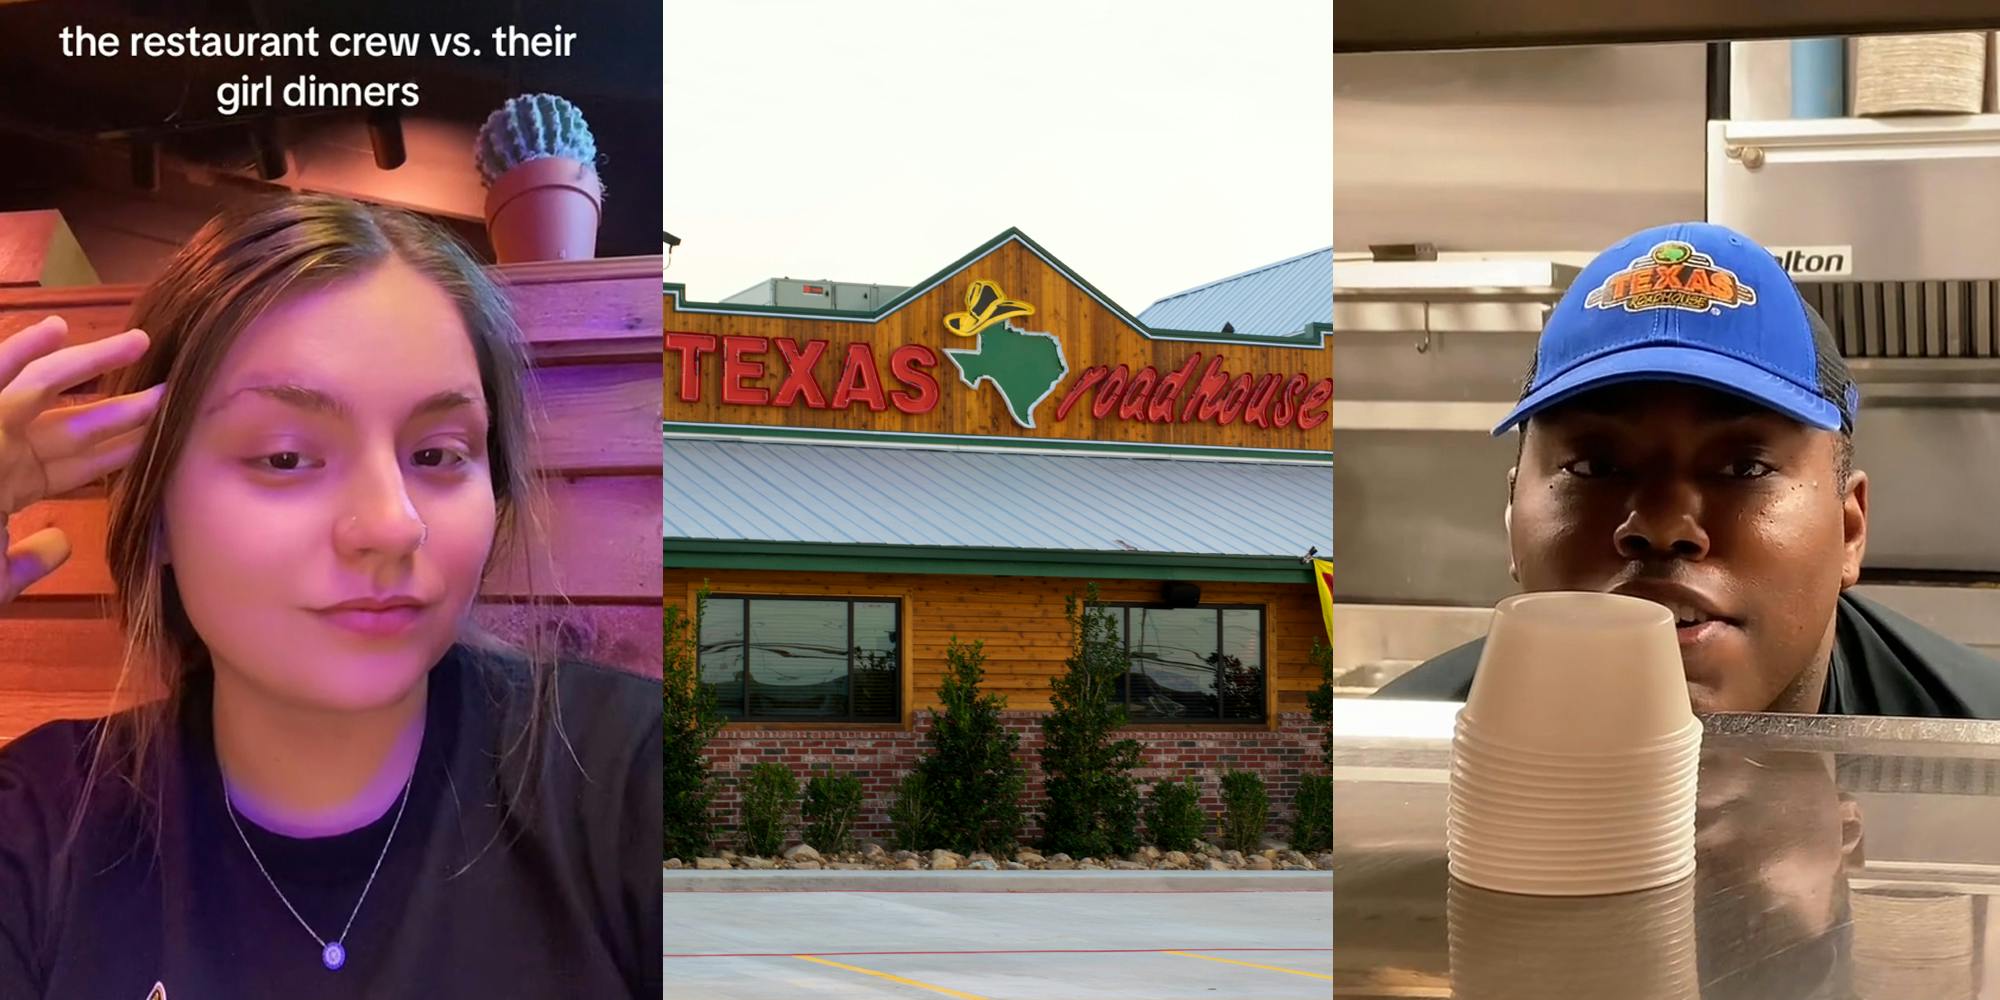 Texas Roadhouse worker with caption "the restaurant crew vs. their girl dinners" (l) Texas Roadhouse building with sign (c) Texas Roadhouse worker speaking (r)